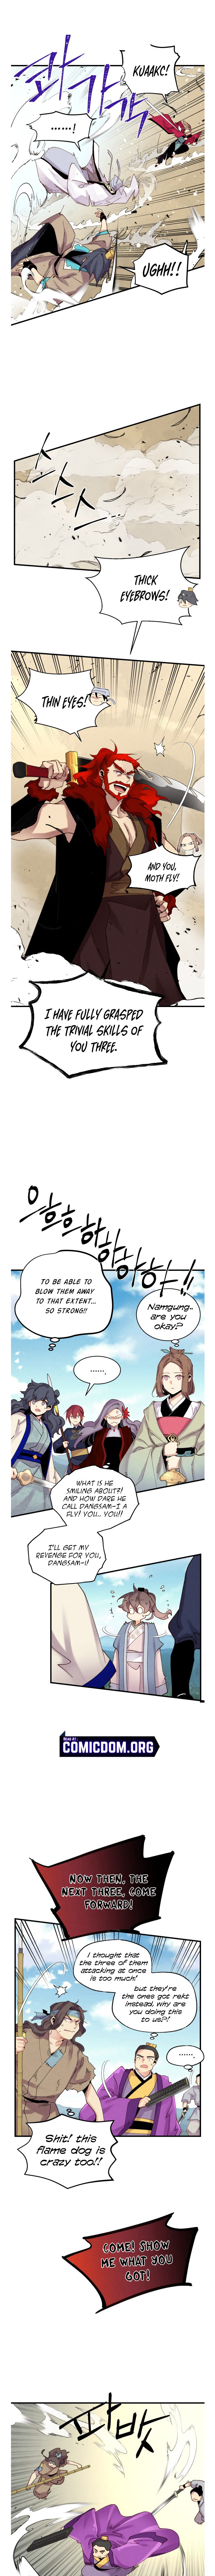 Lightning Degree - Chapter 101 Page 5